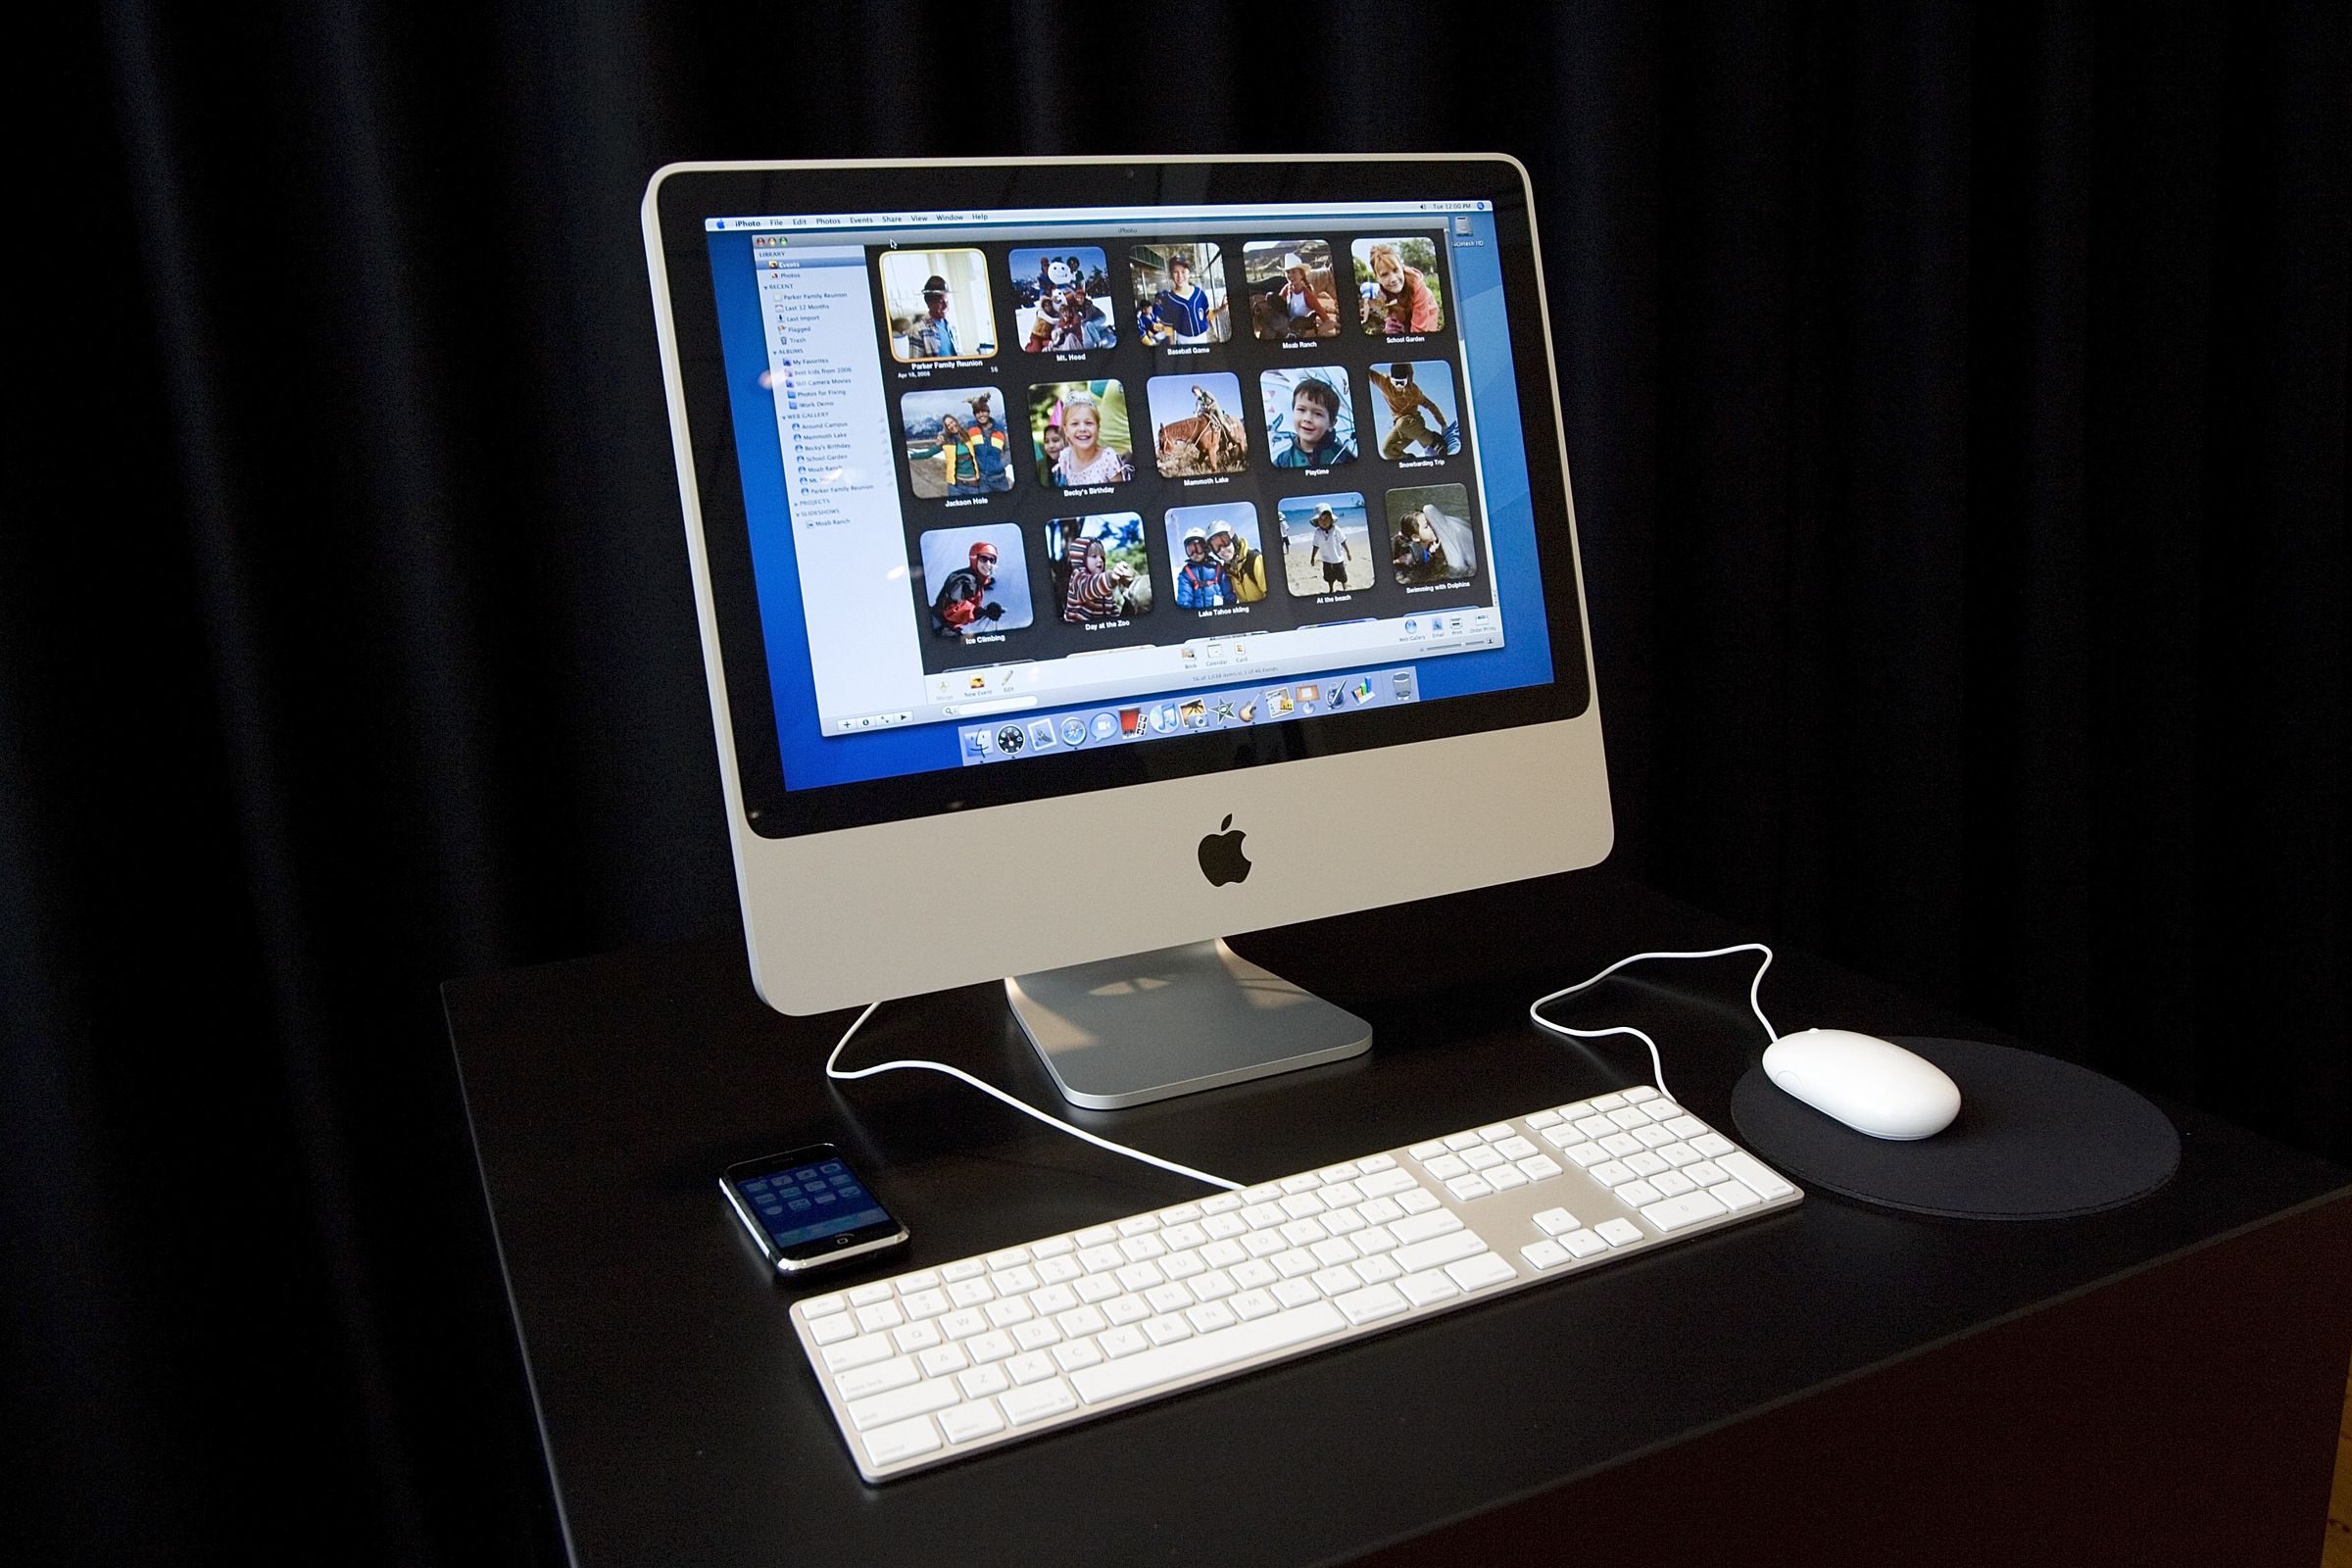 Apple Introduces New Versions Of The iMac Computer And iLife Applications